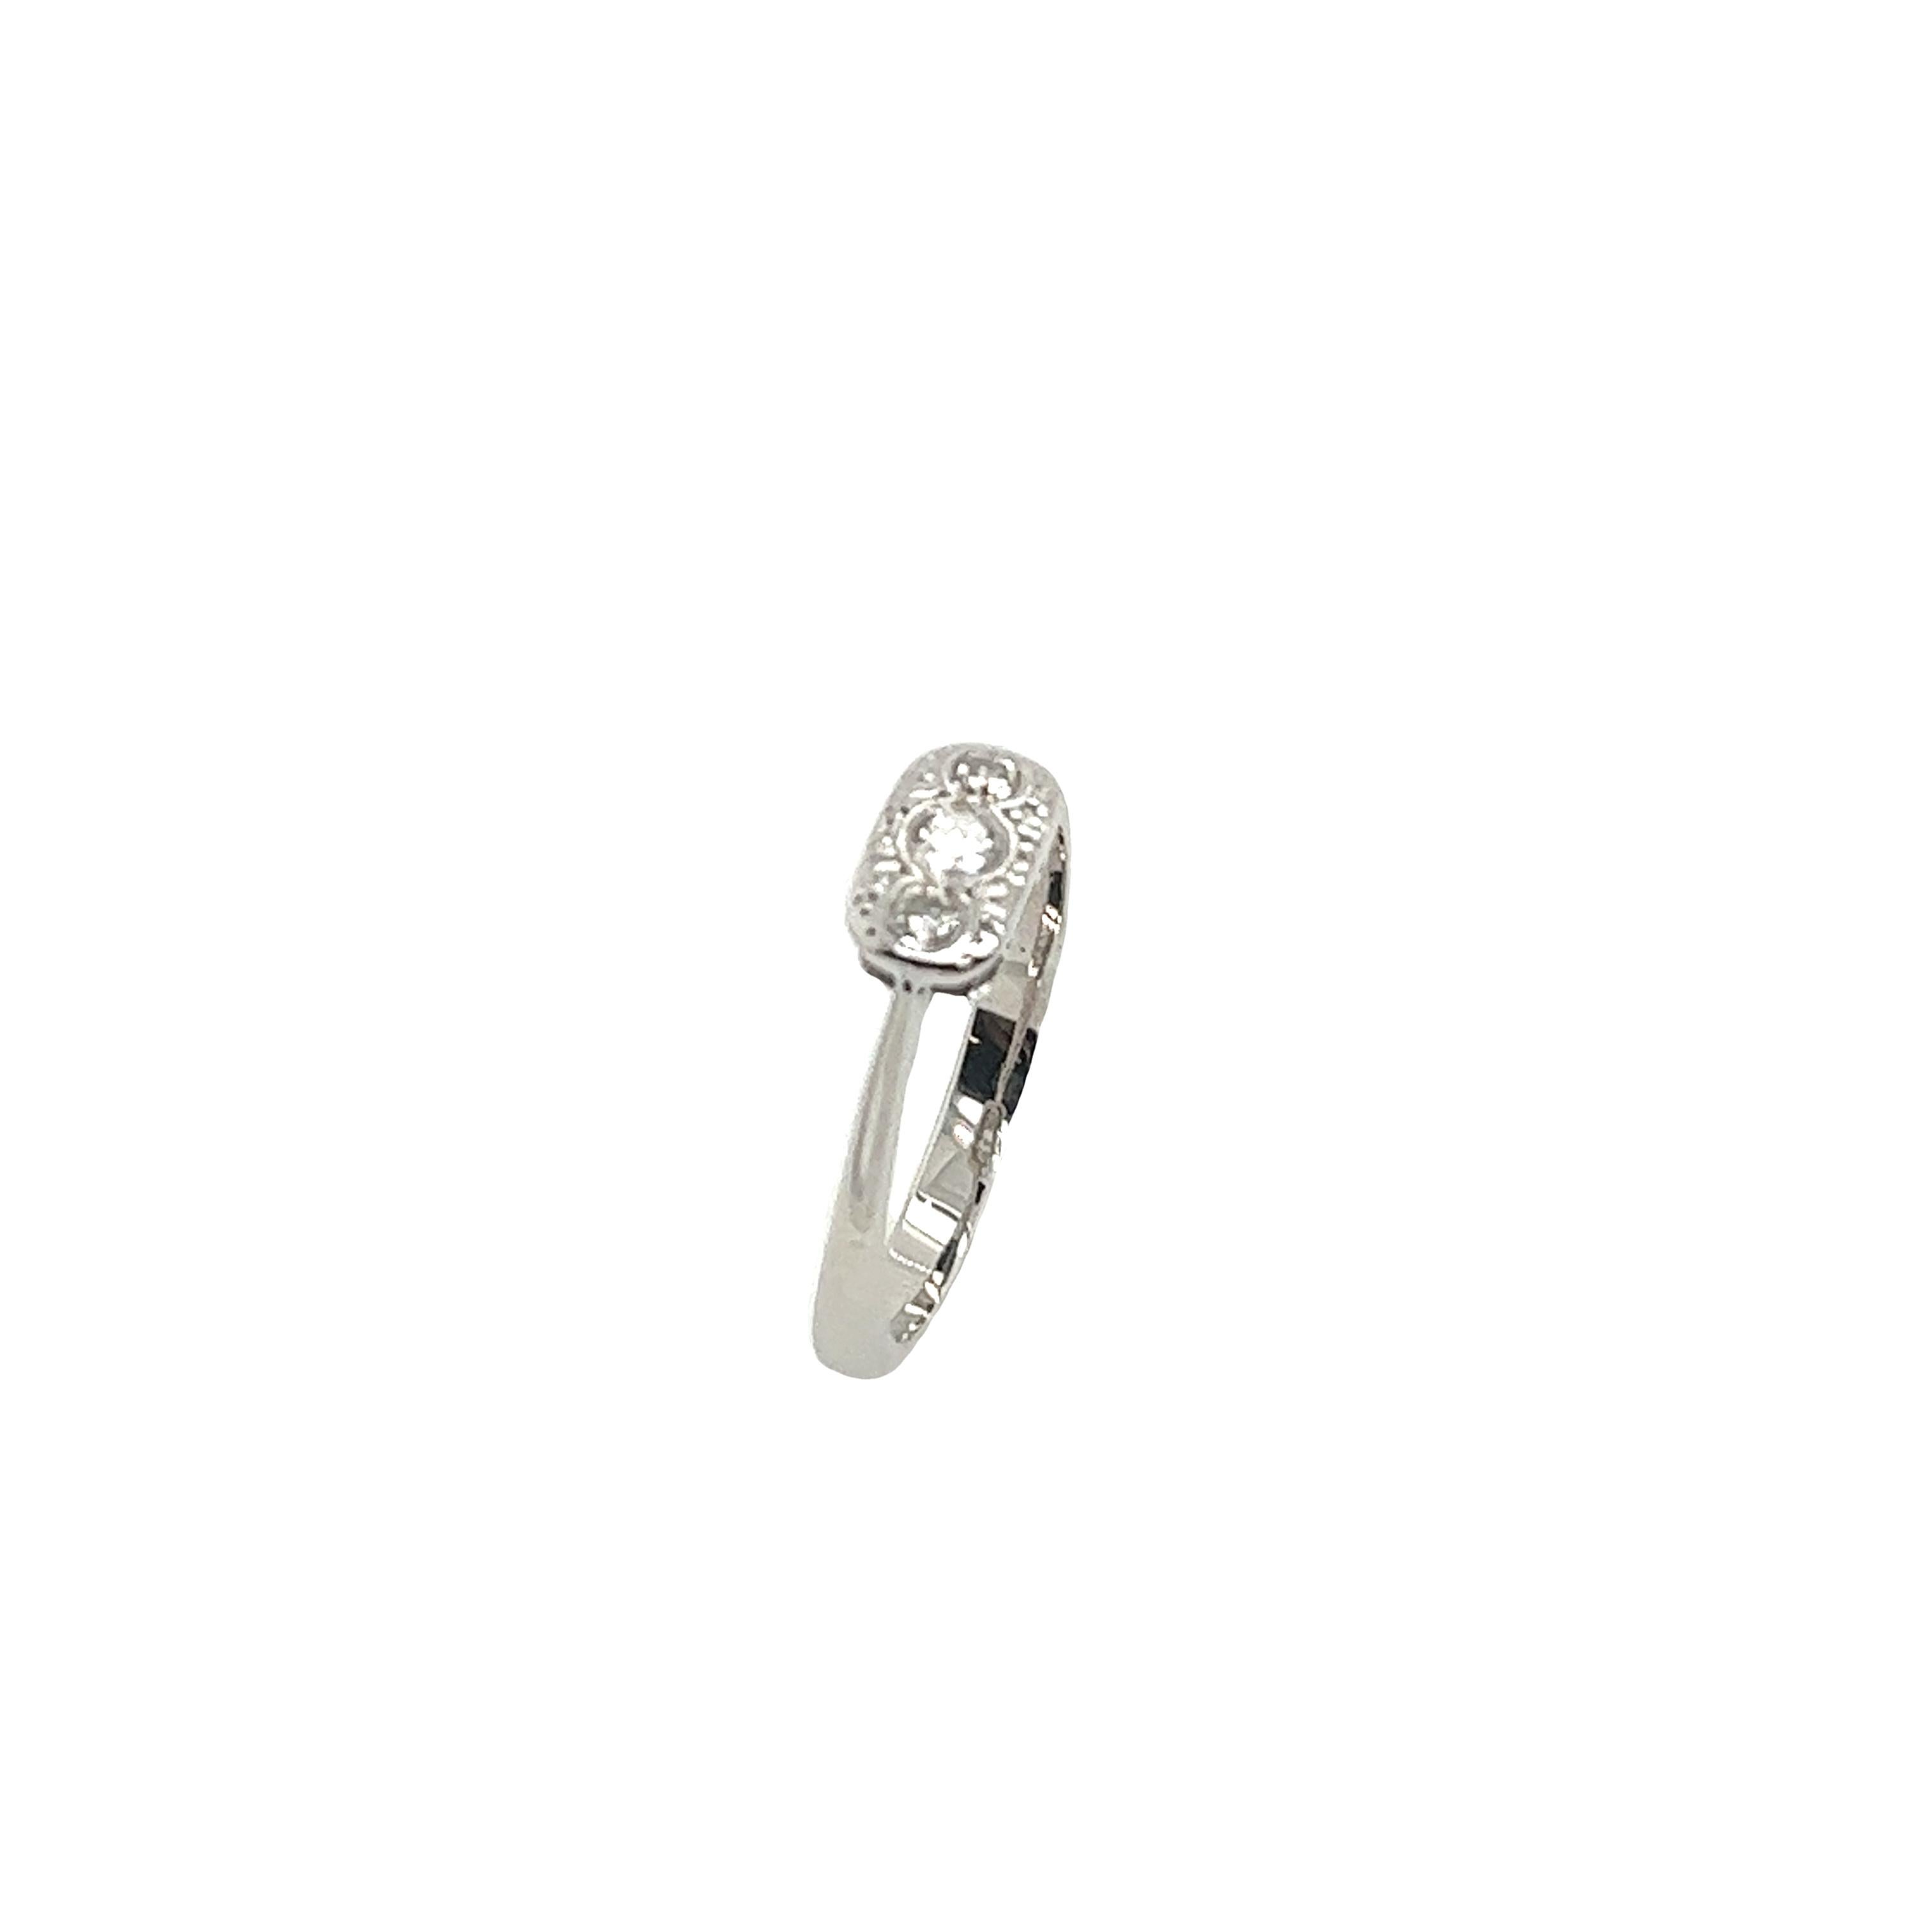 An elegant diamond vintage pre-loved ring, 
set with 3 round old cut natural diamonds
in platinum setting.
Total Diamond Weight: 0.10ct
Diamond Colour: H
Diamond Clarity: SI1
Width of Band: 2.55mm
Width of Head: 5.13mm
Length of Head: 8.85mm
Total